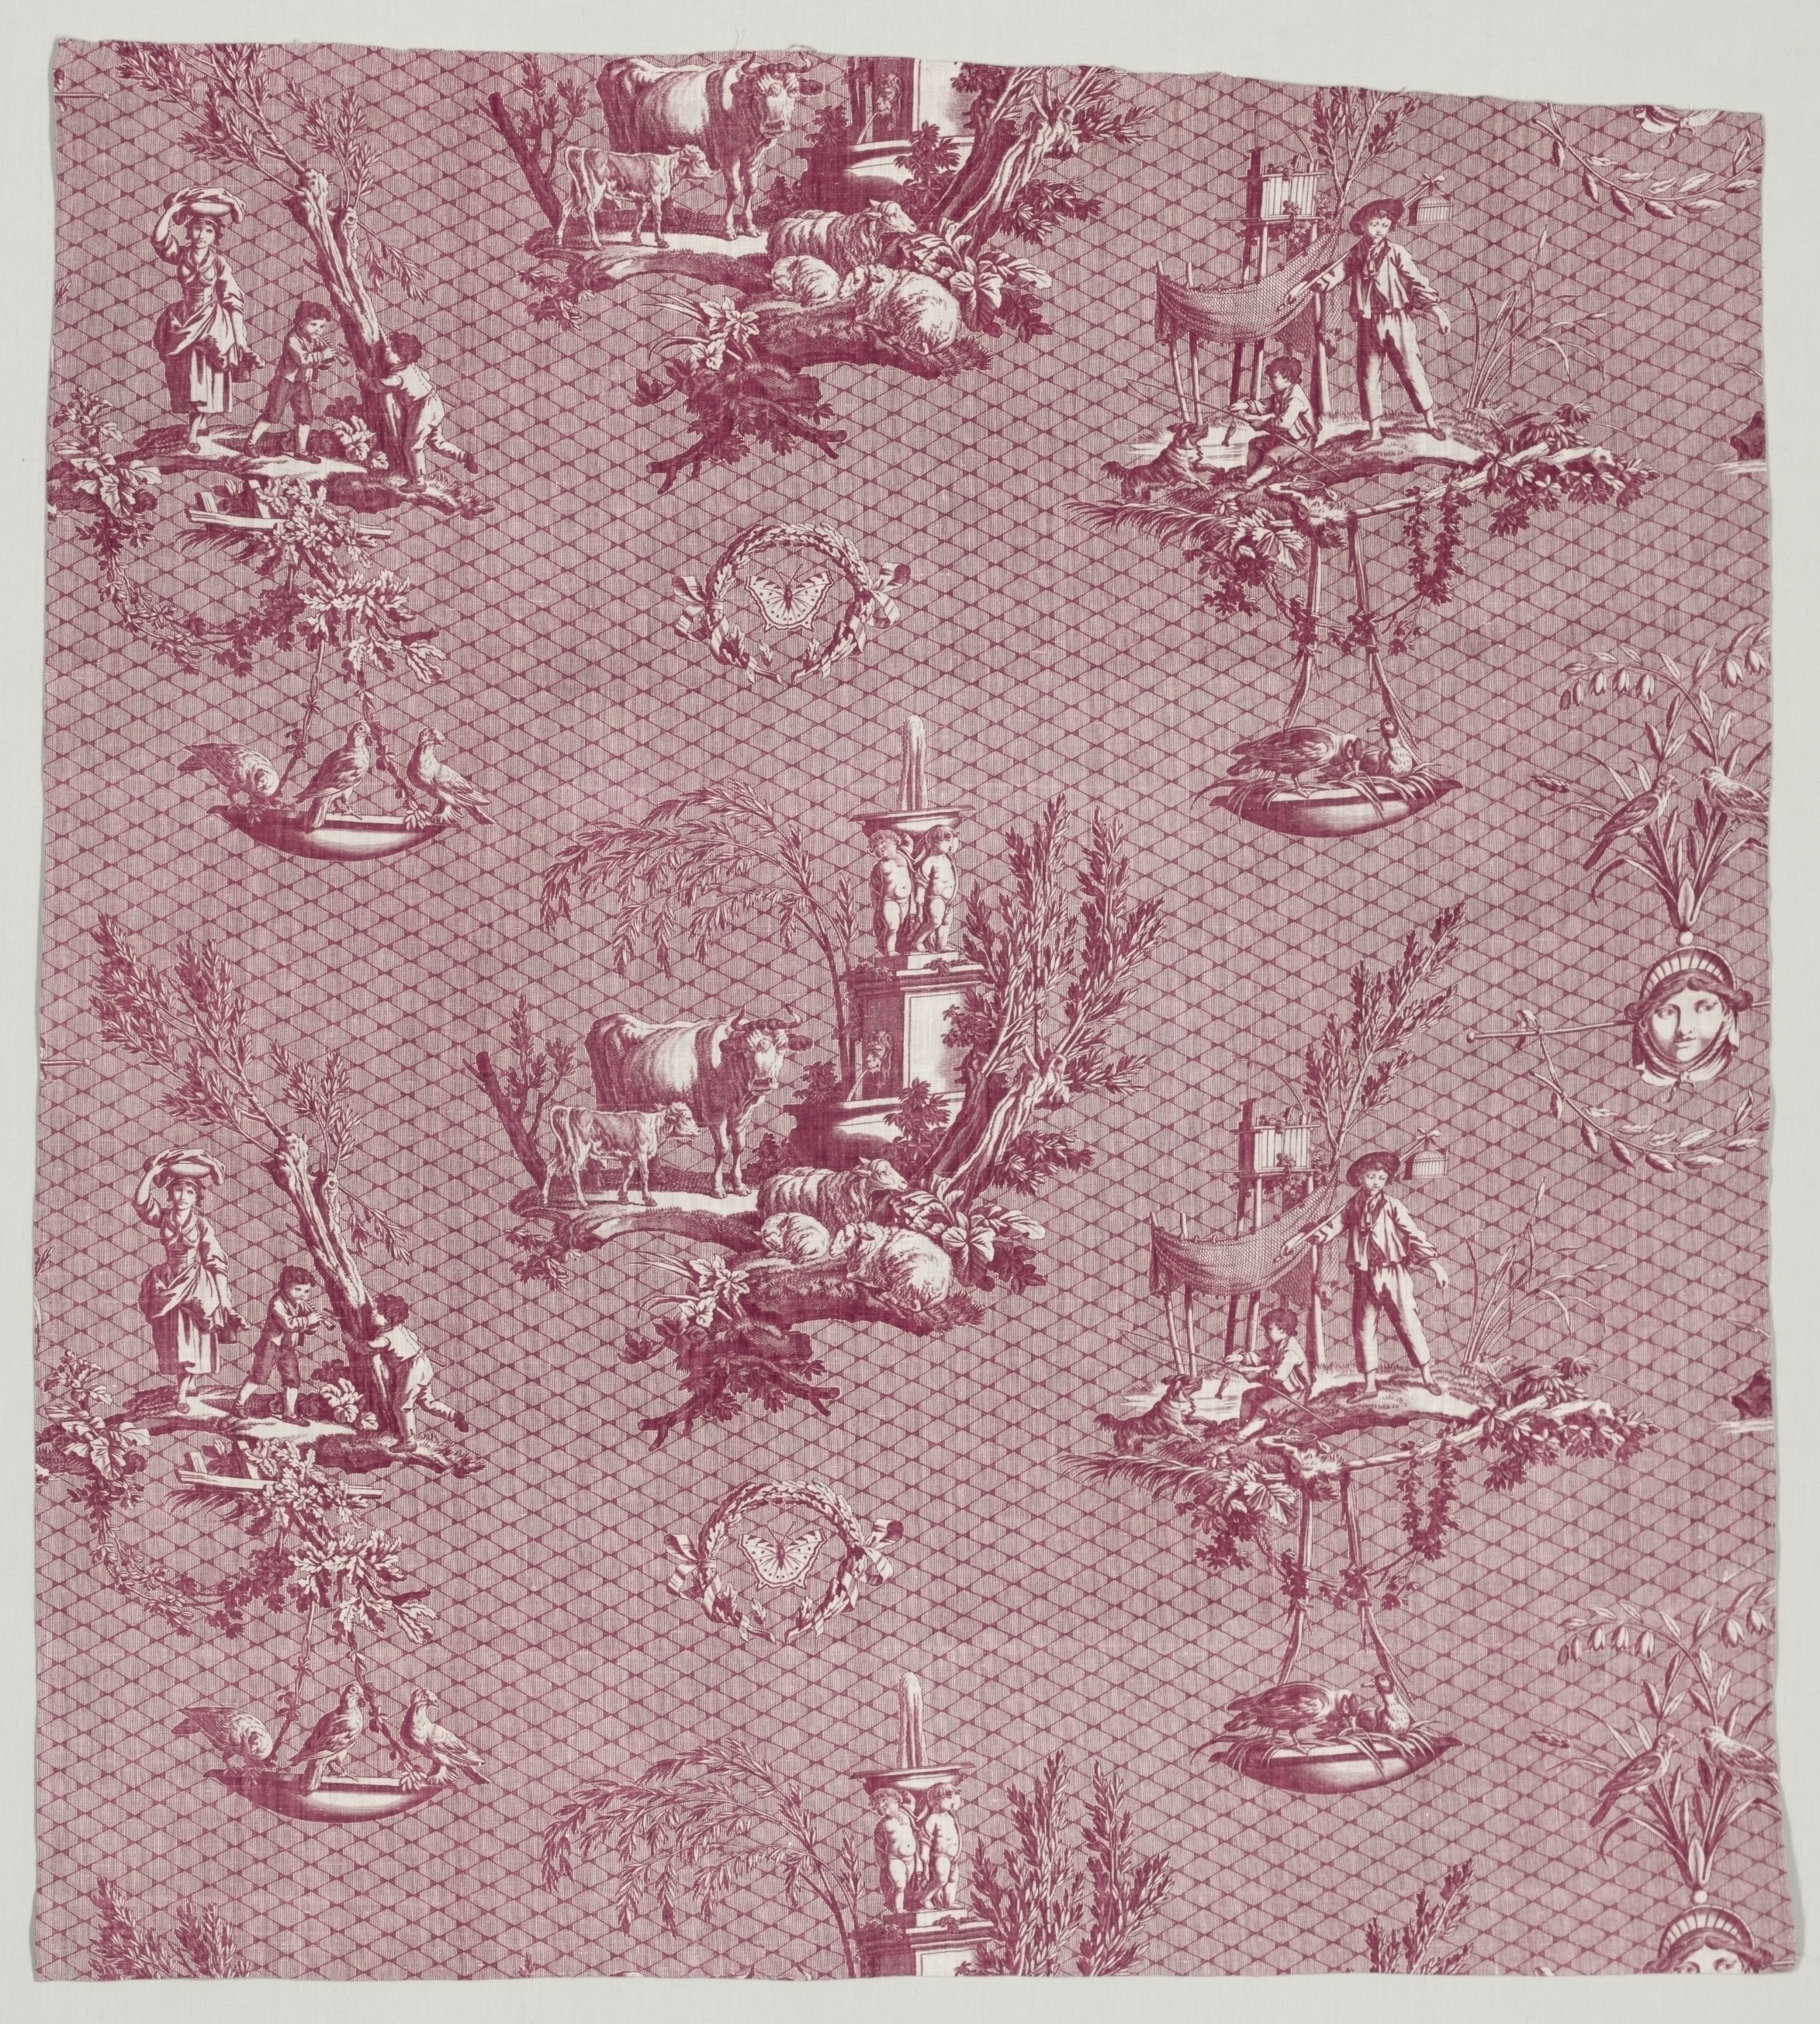 Strip of Copperplate Printed Cotton with "L'Oiseleur" Design